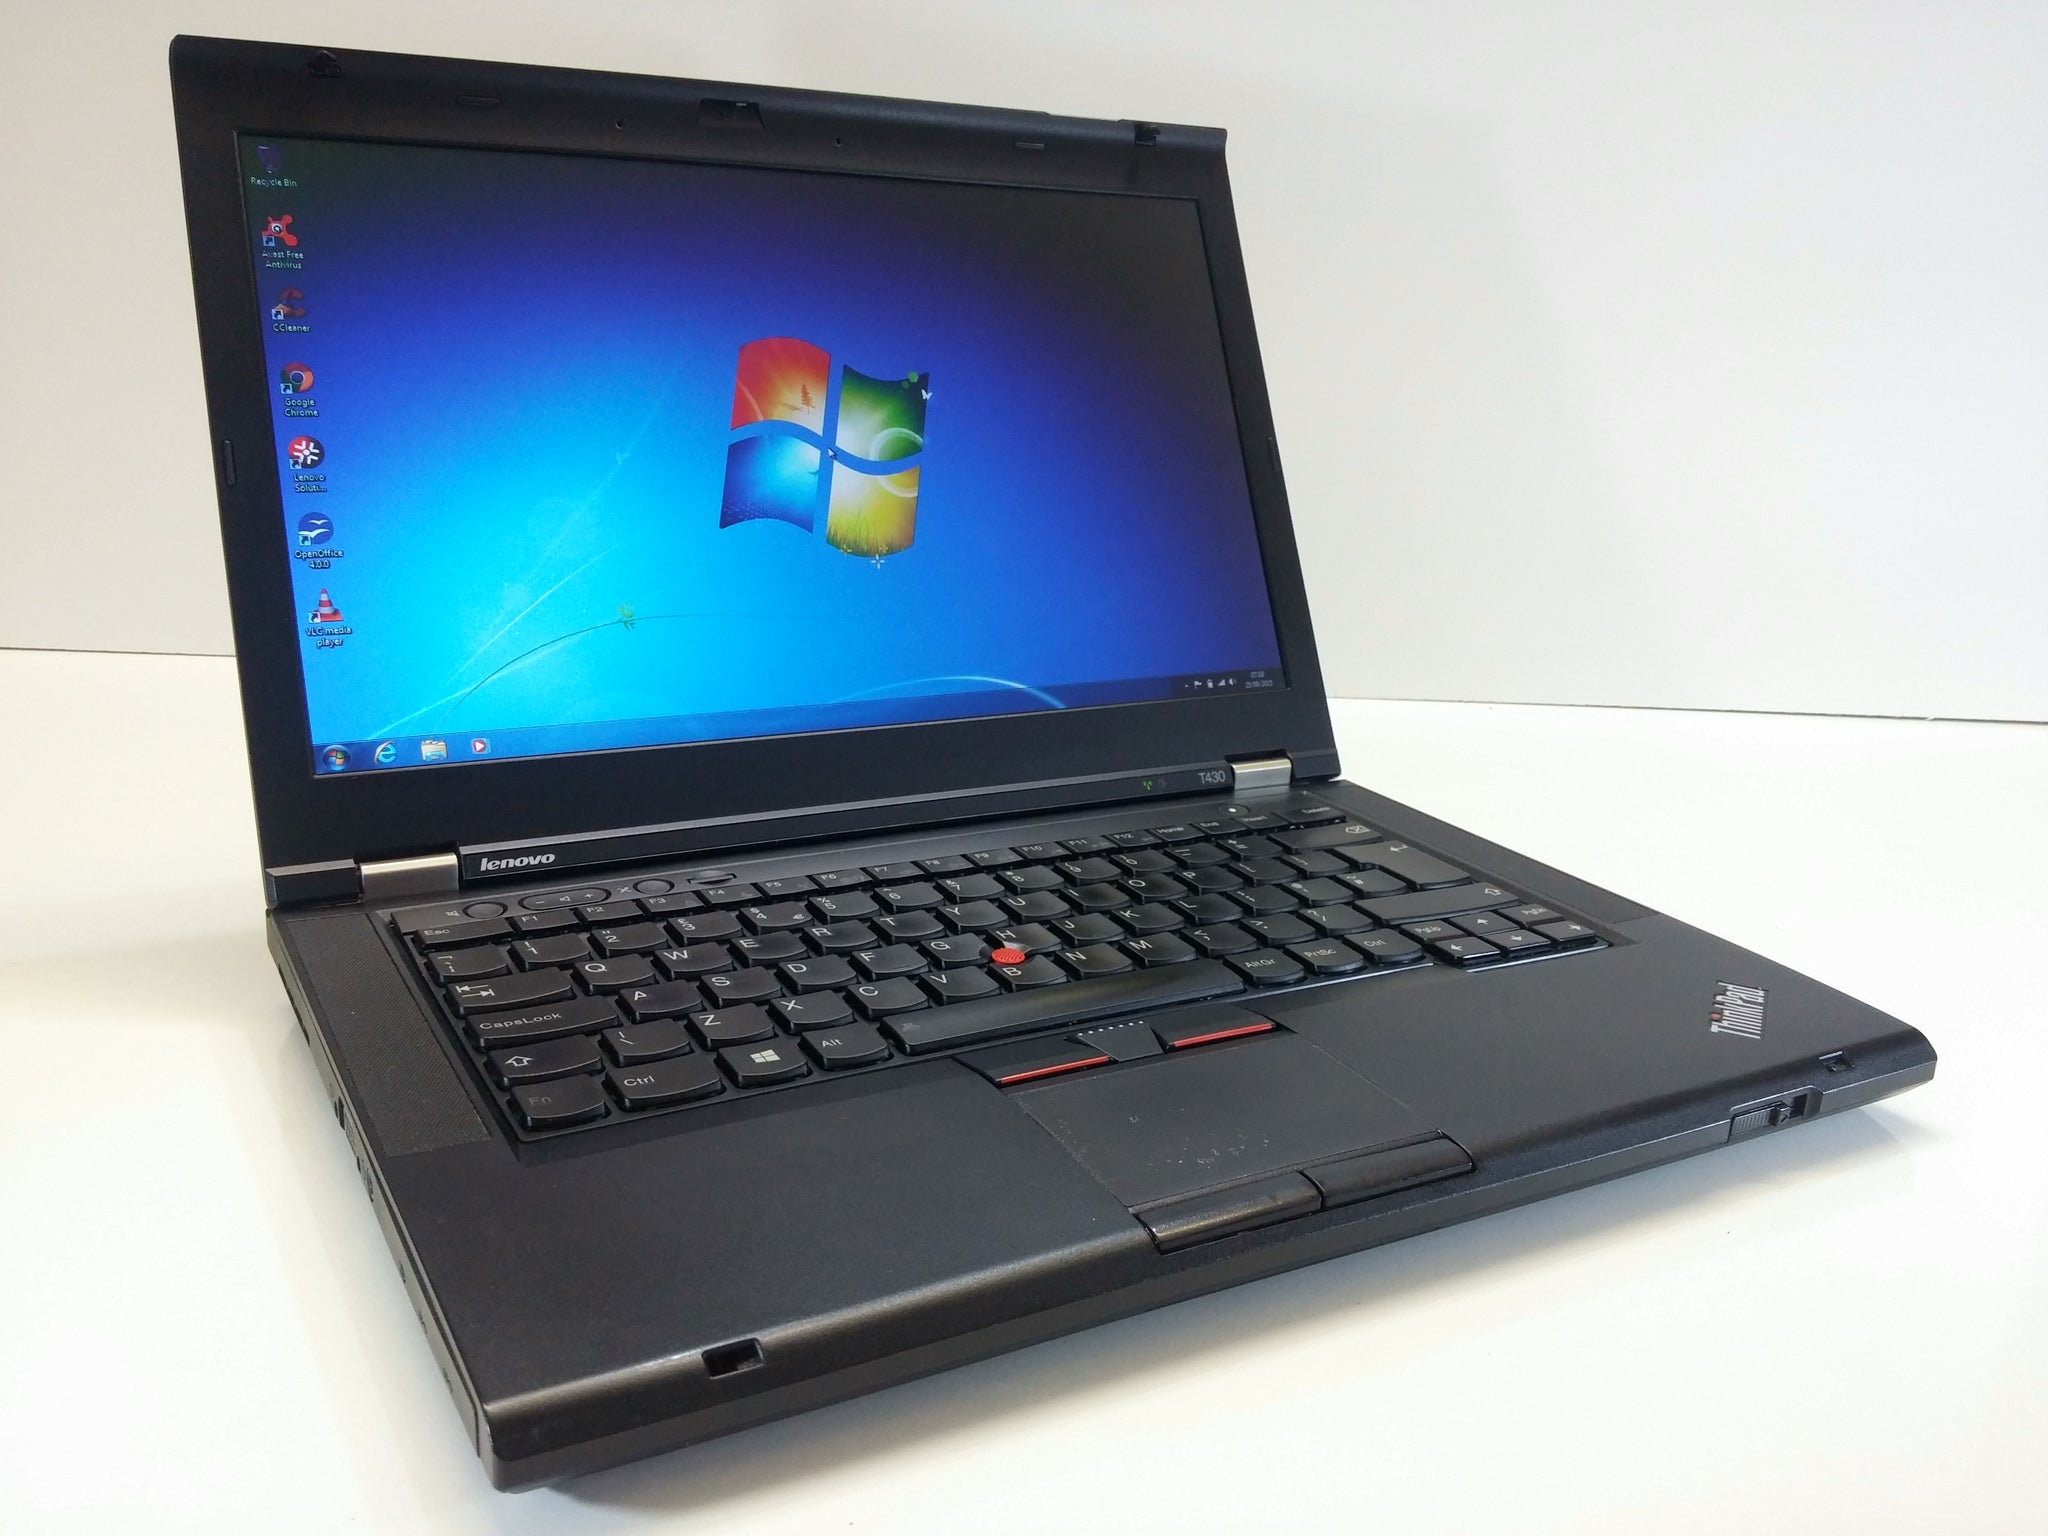 Lenovo ThinkPad T430s Refurbished Laptop for Sale | Free Shipping